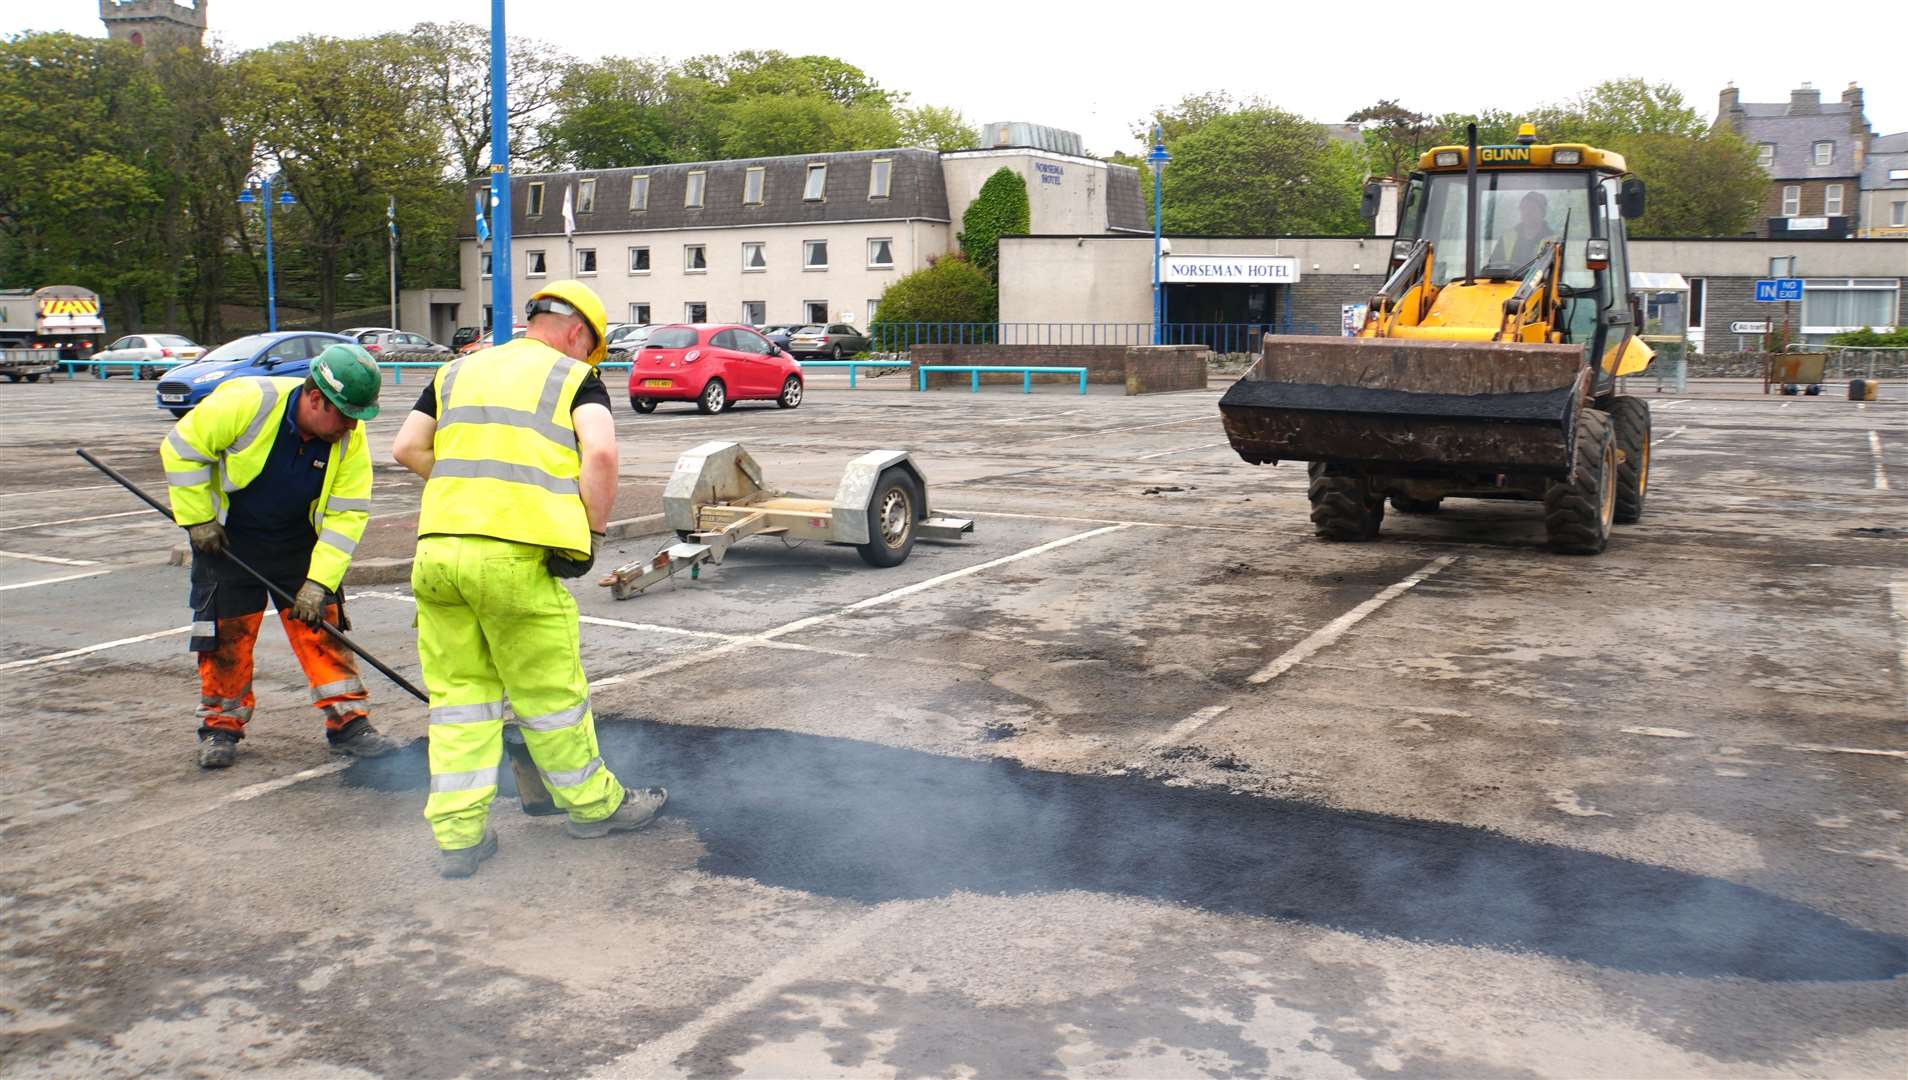 Contractors working on the badly potholed Wick riverside car park on Monday. Pictures: DGS